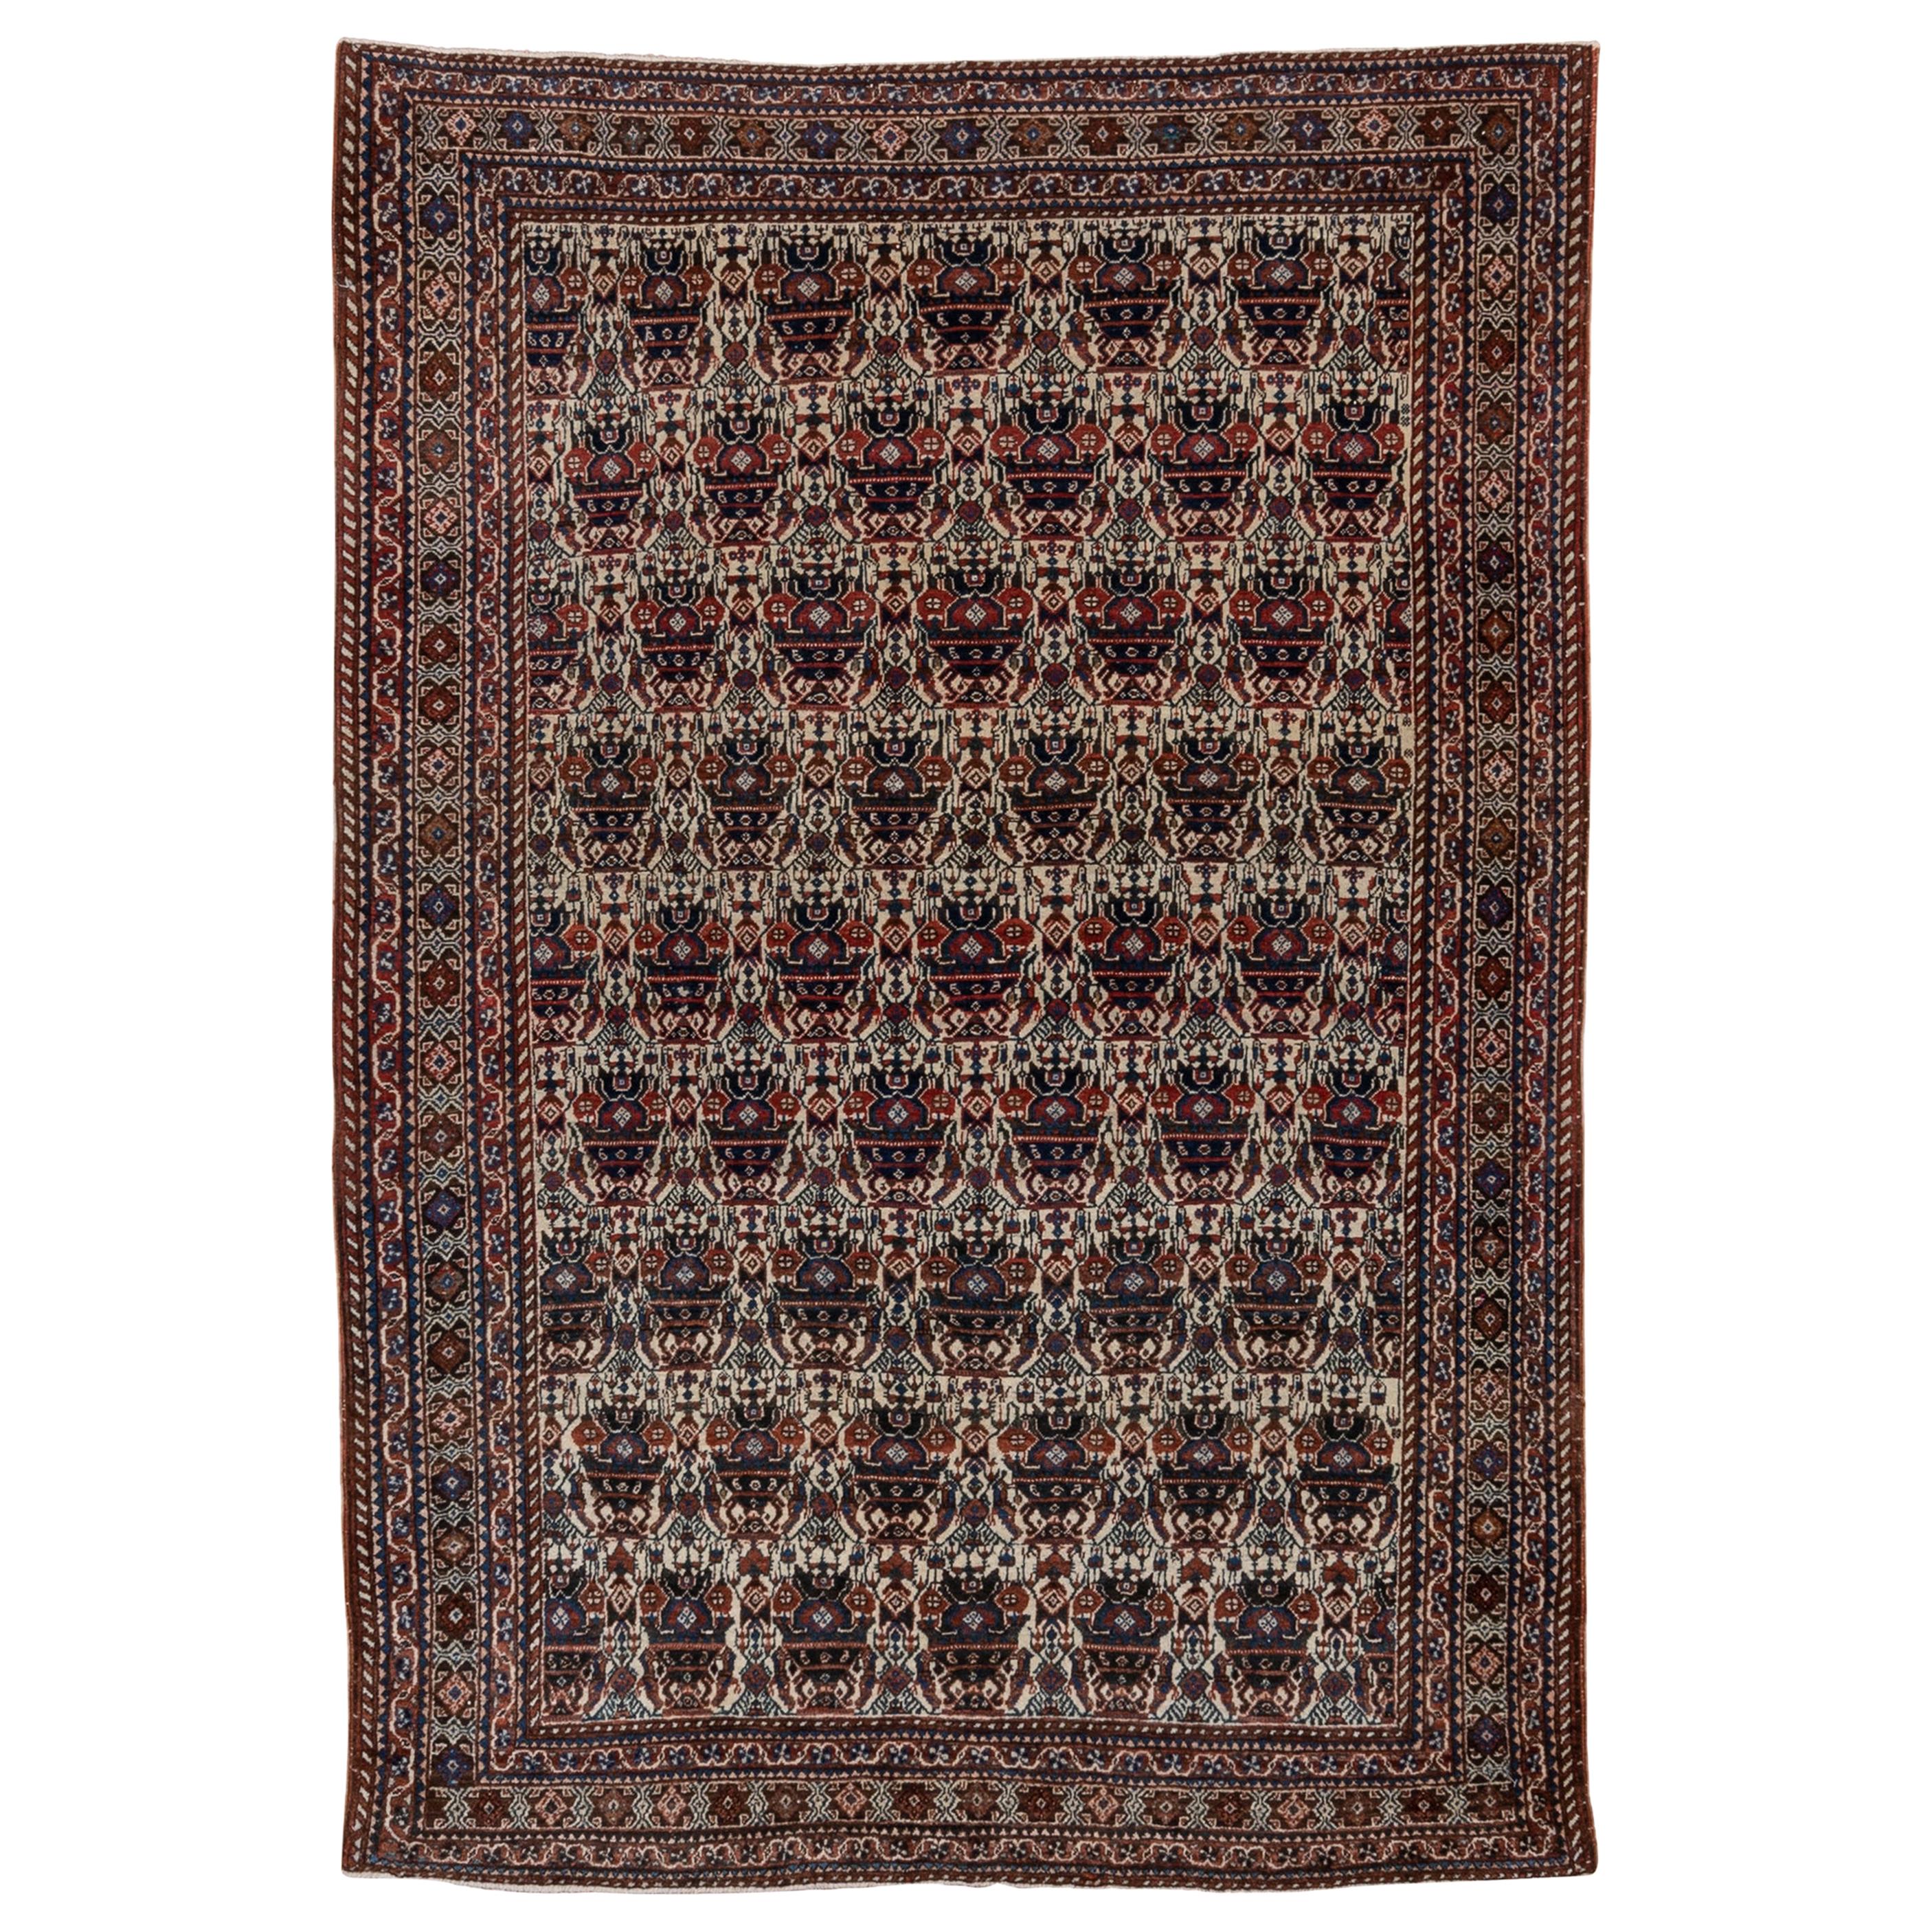 Finely Woven Tribal Persian Abadeh Scatter Rug, Allover Field, circa 1930s For Sale